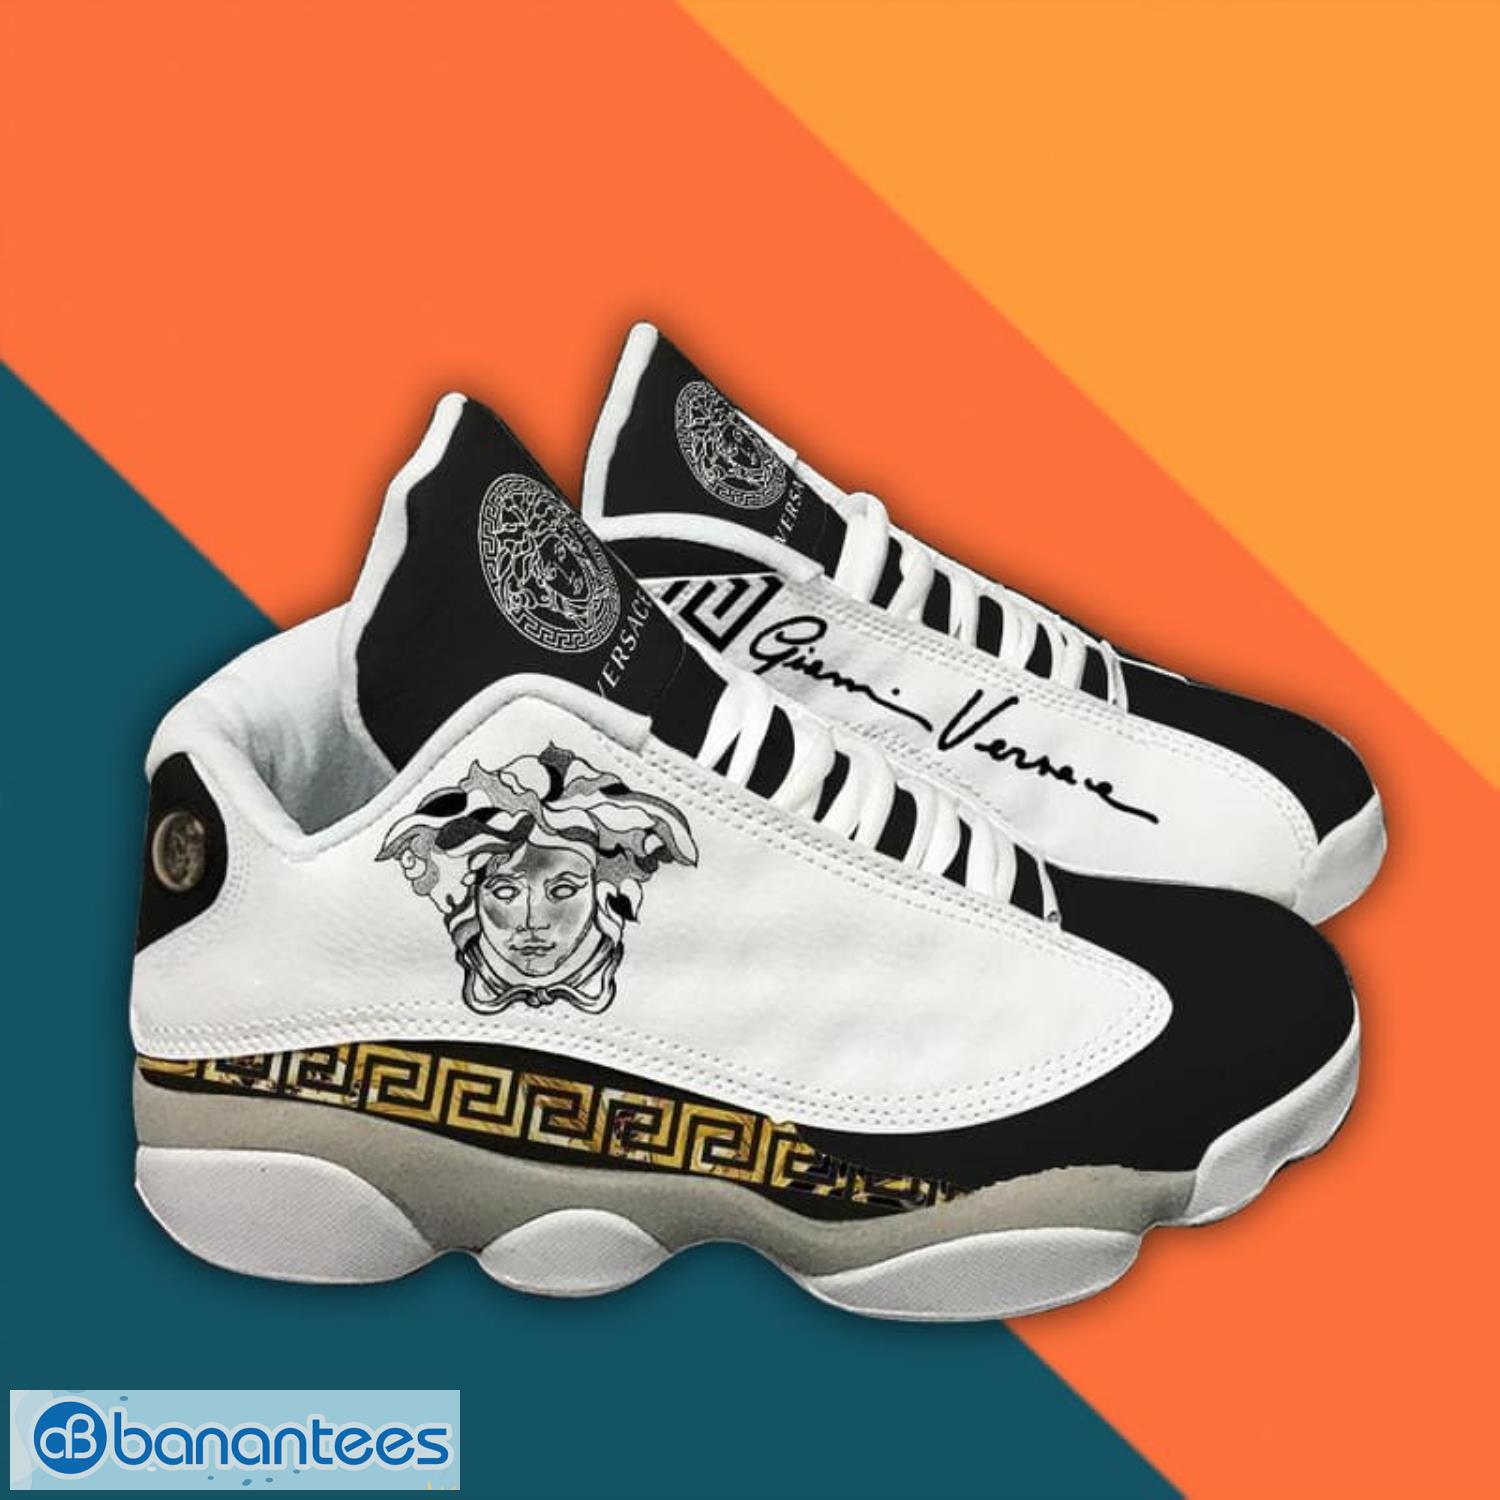 Versace Black And White Air Jordan 13 Sneaker Shoes Product Photo 1